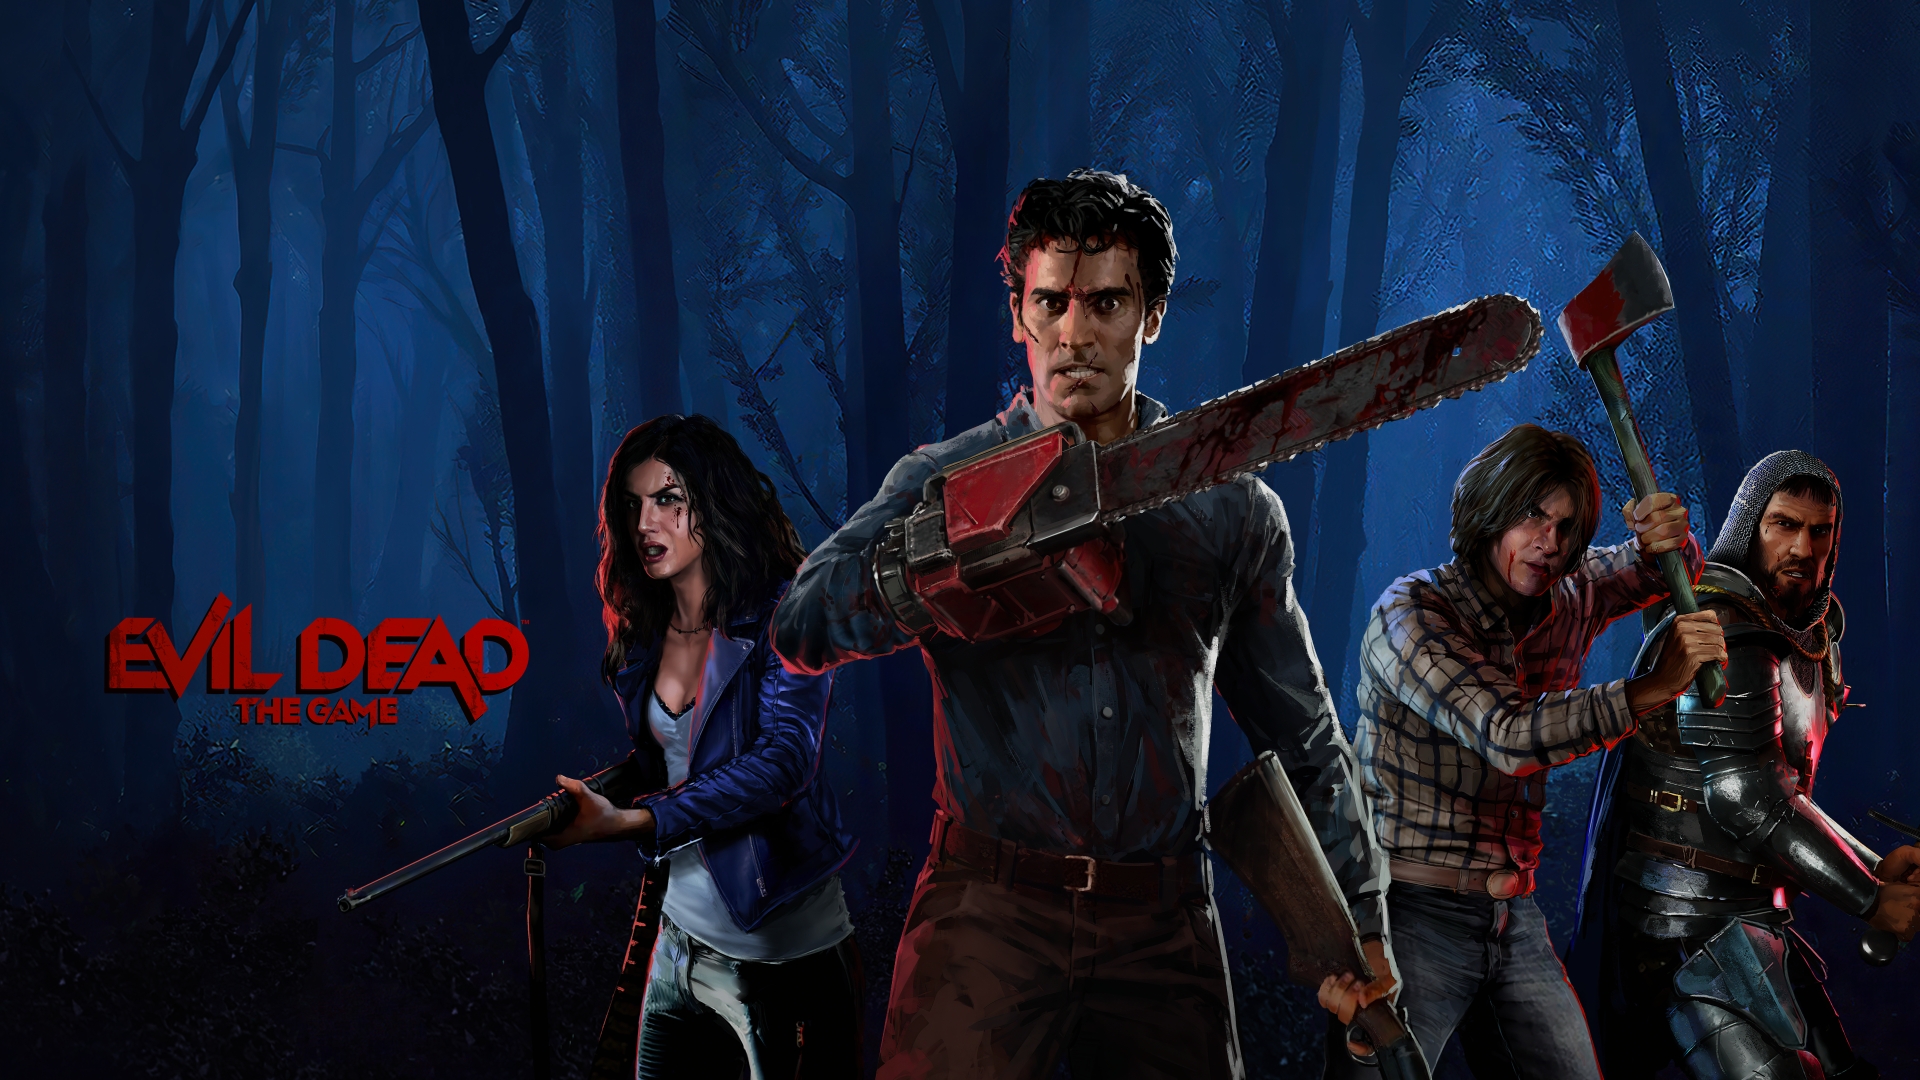 Does Evil Dead The Game have single-player story mode?